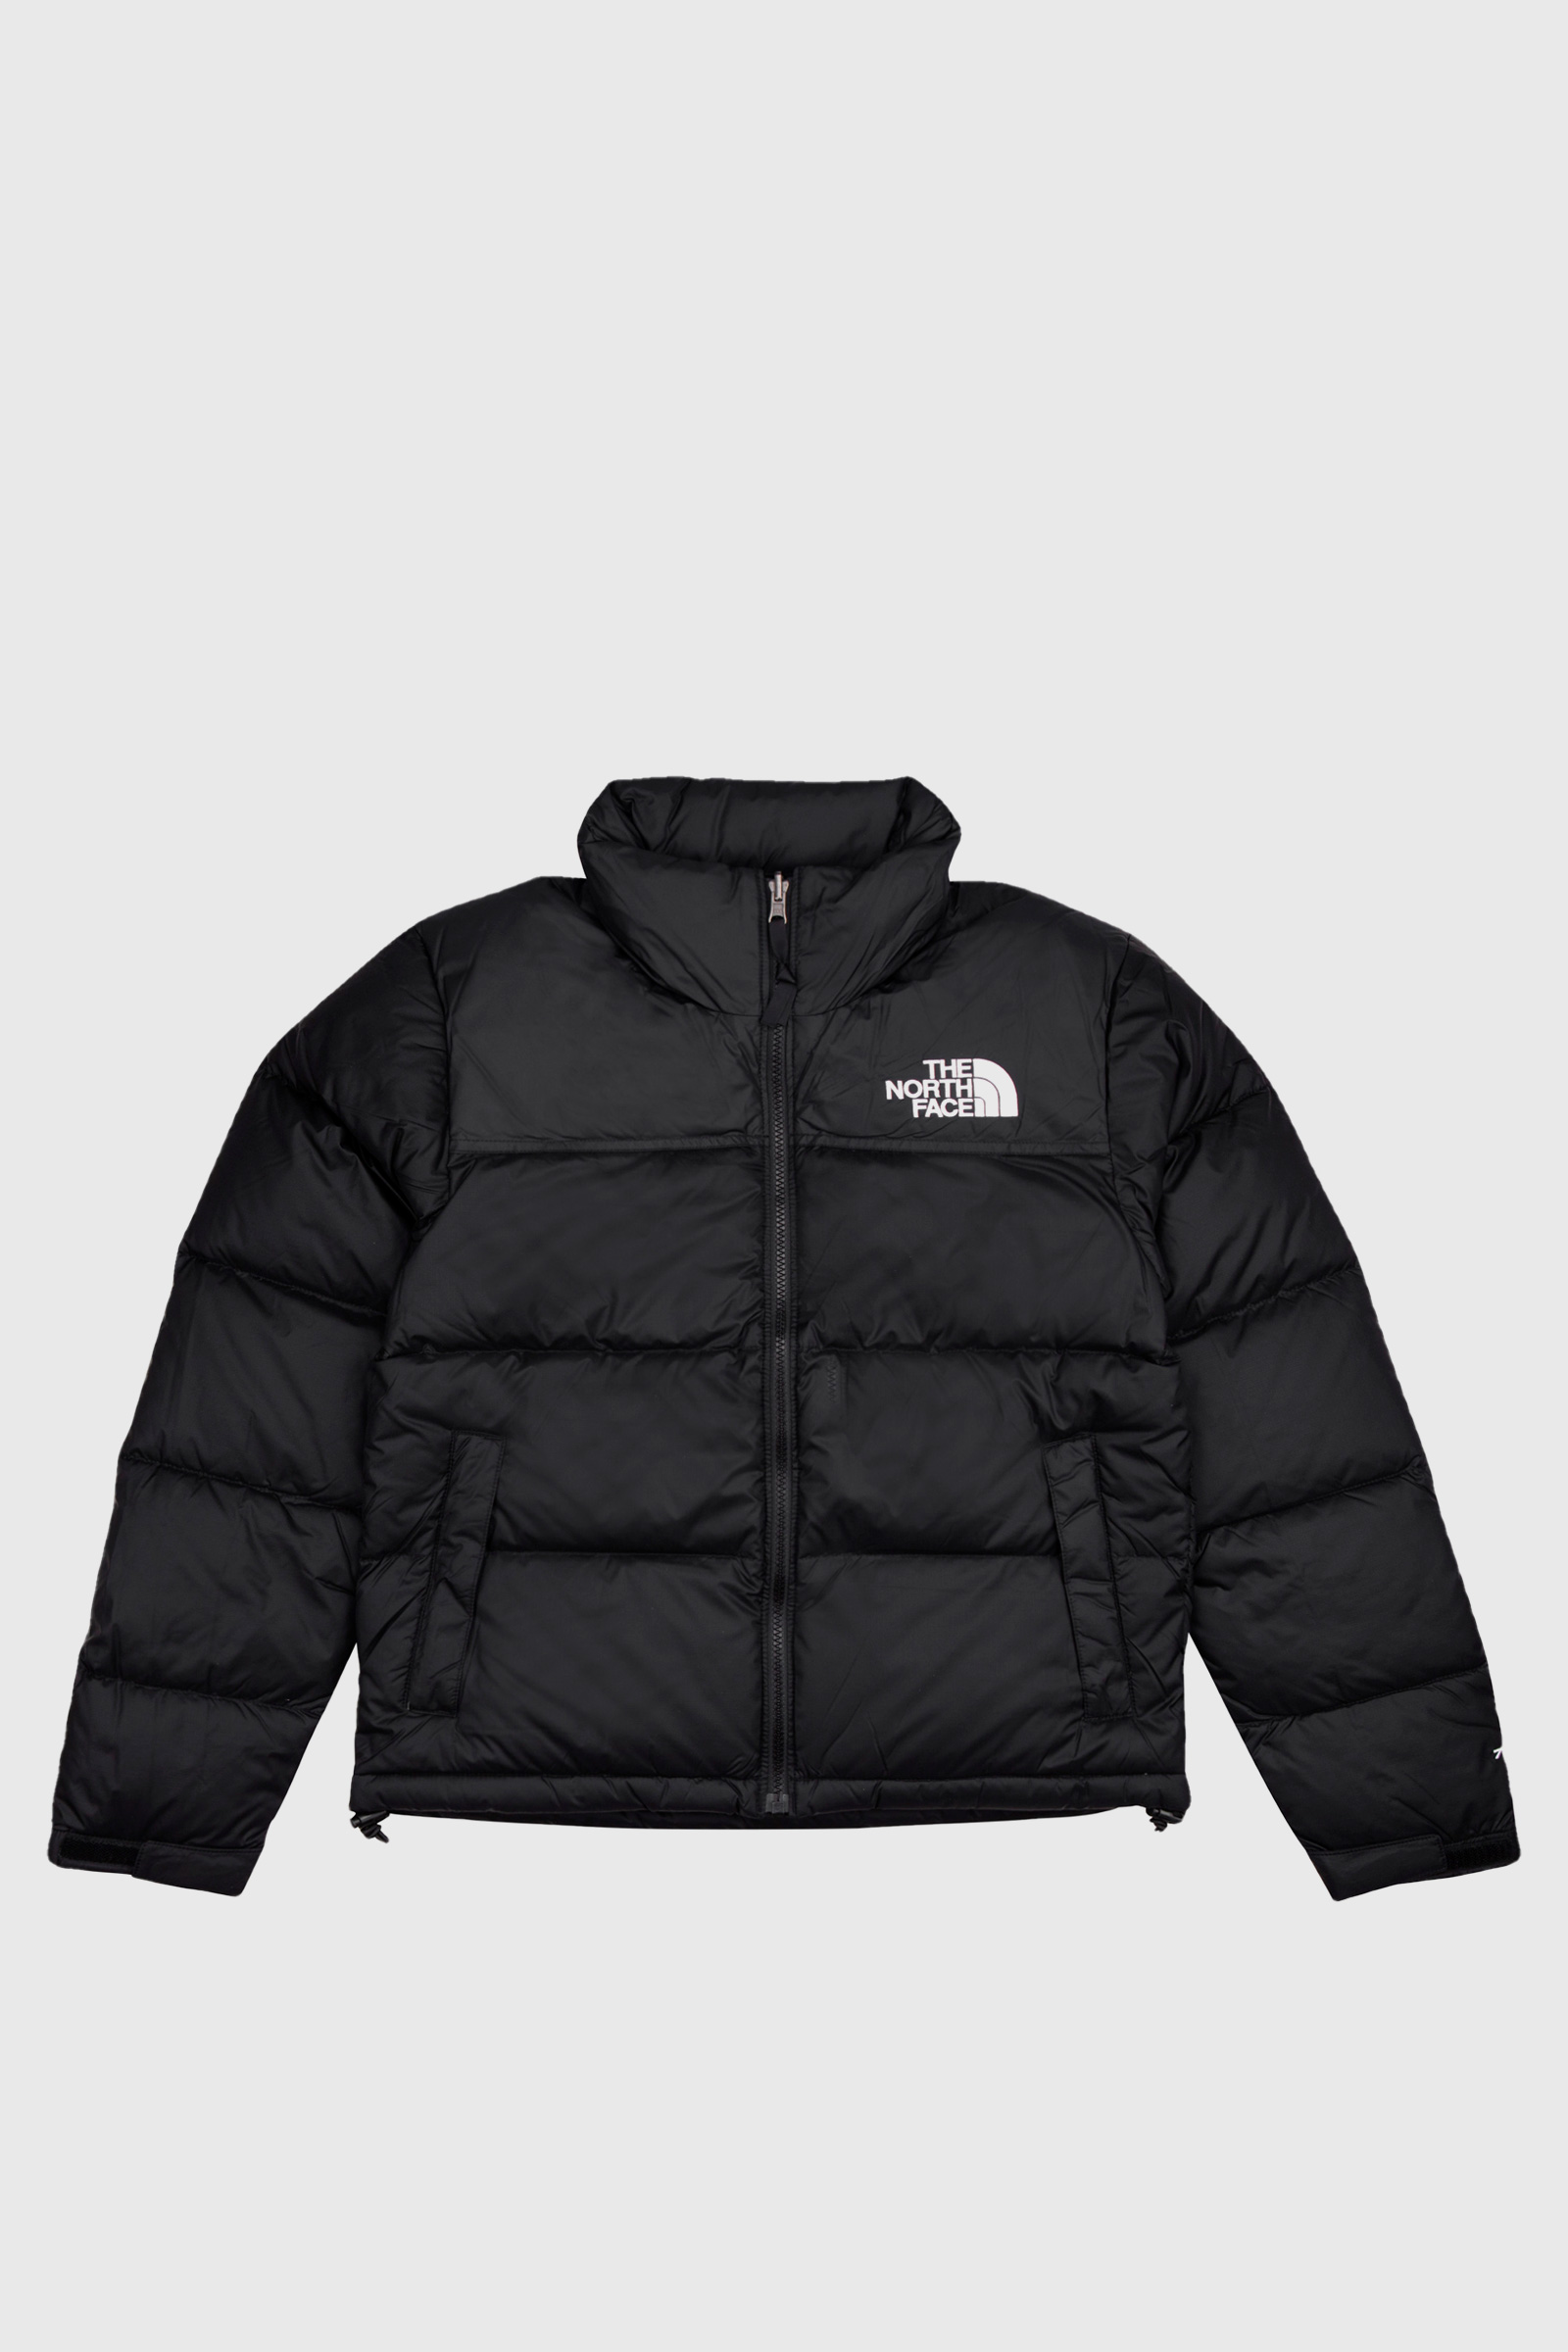 The North Face W 1996 Retro Jacket Recycled TNF Black | WoodWood.com